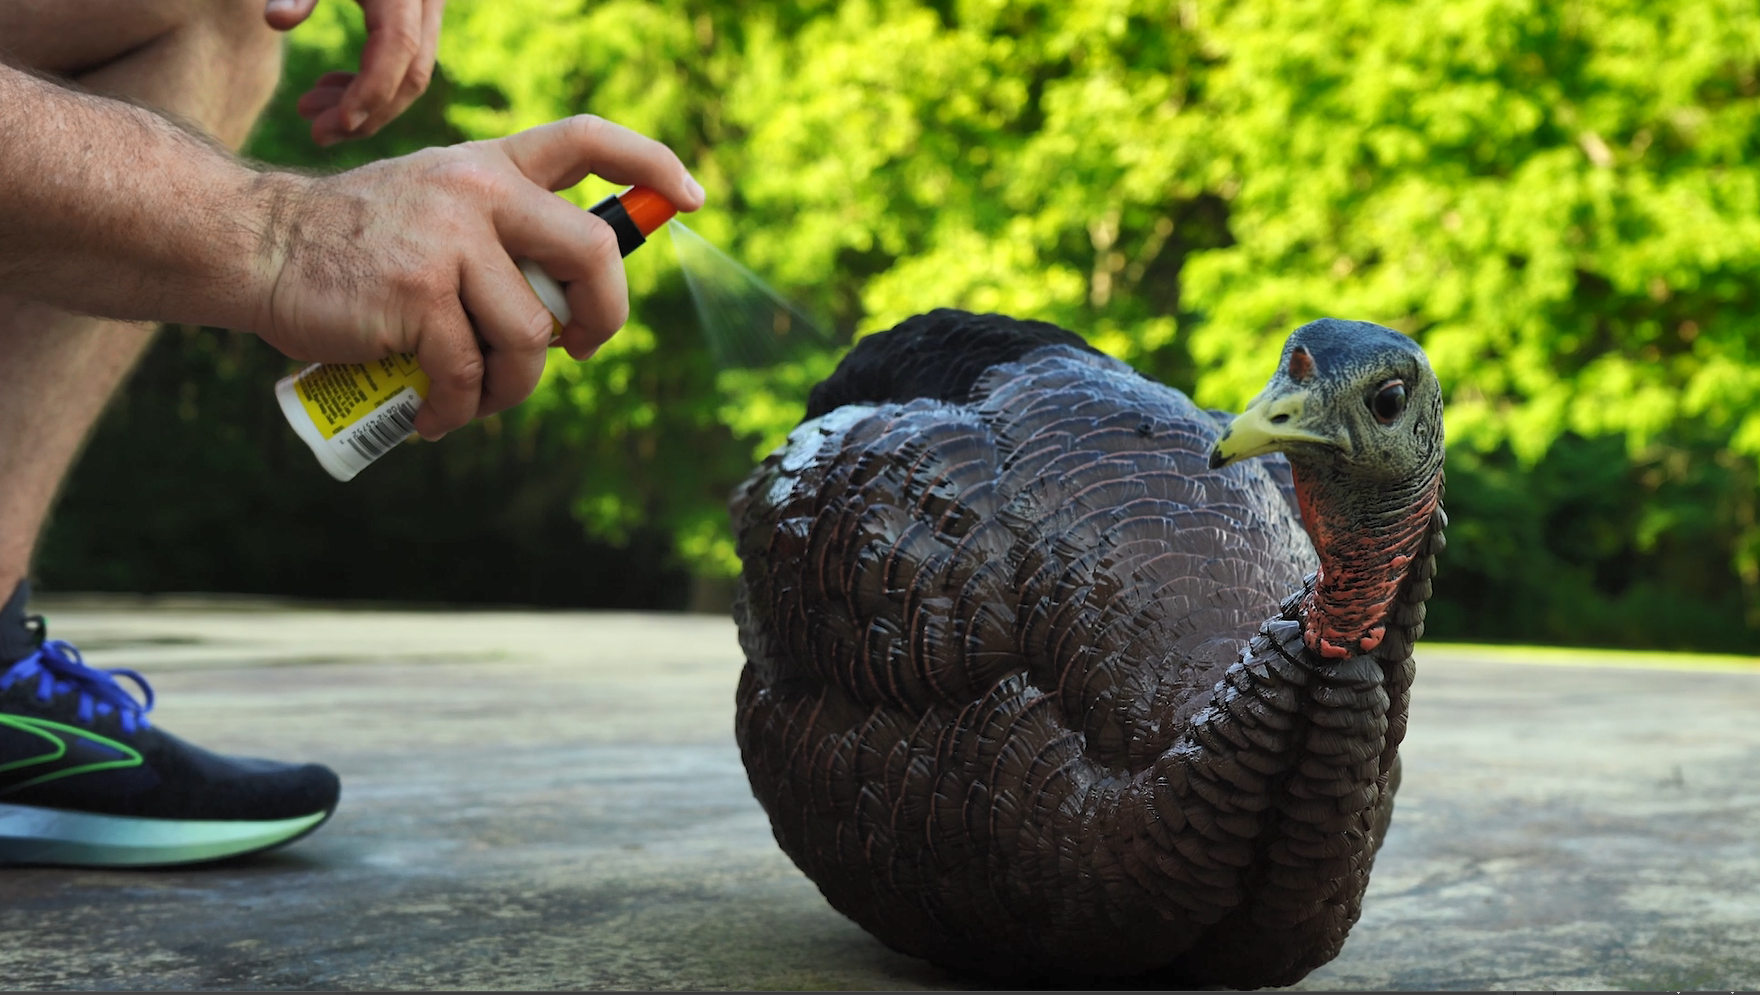 Image relating to How to Set Up and Take Down Turkey Decoys